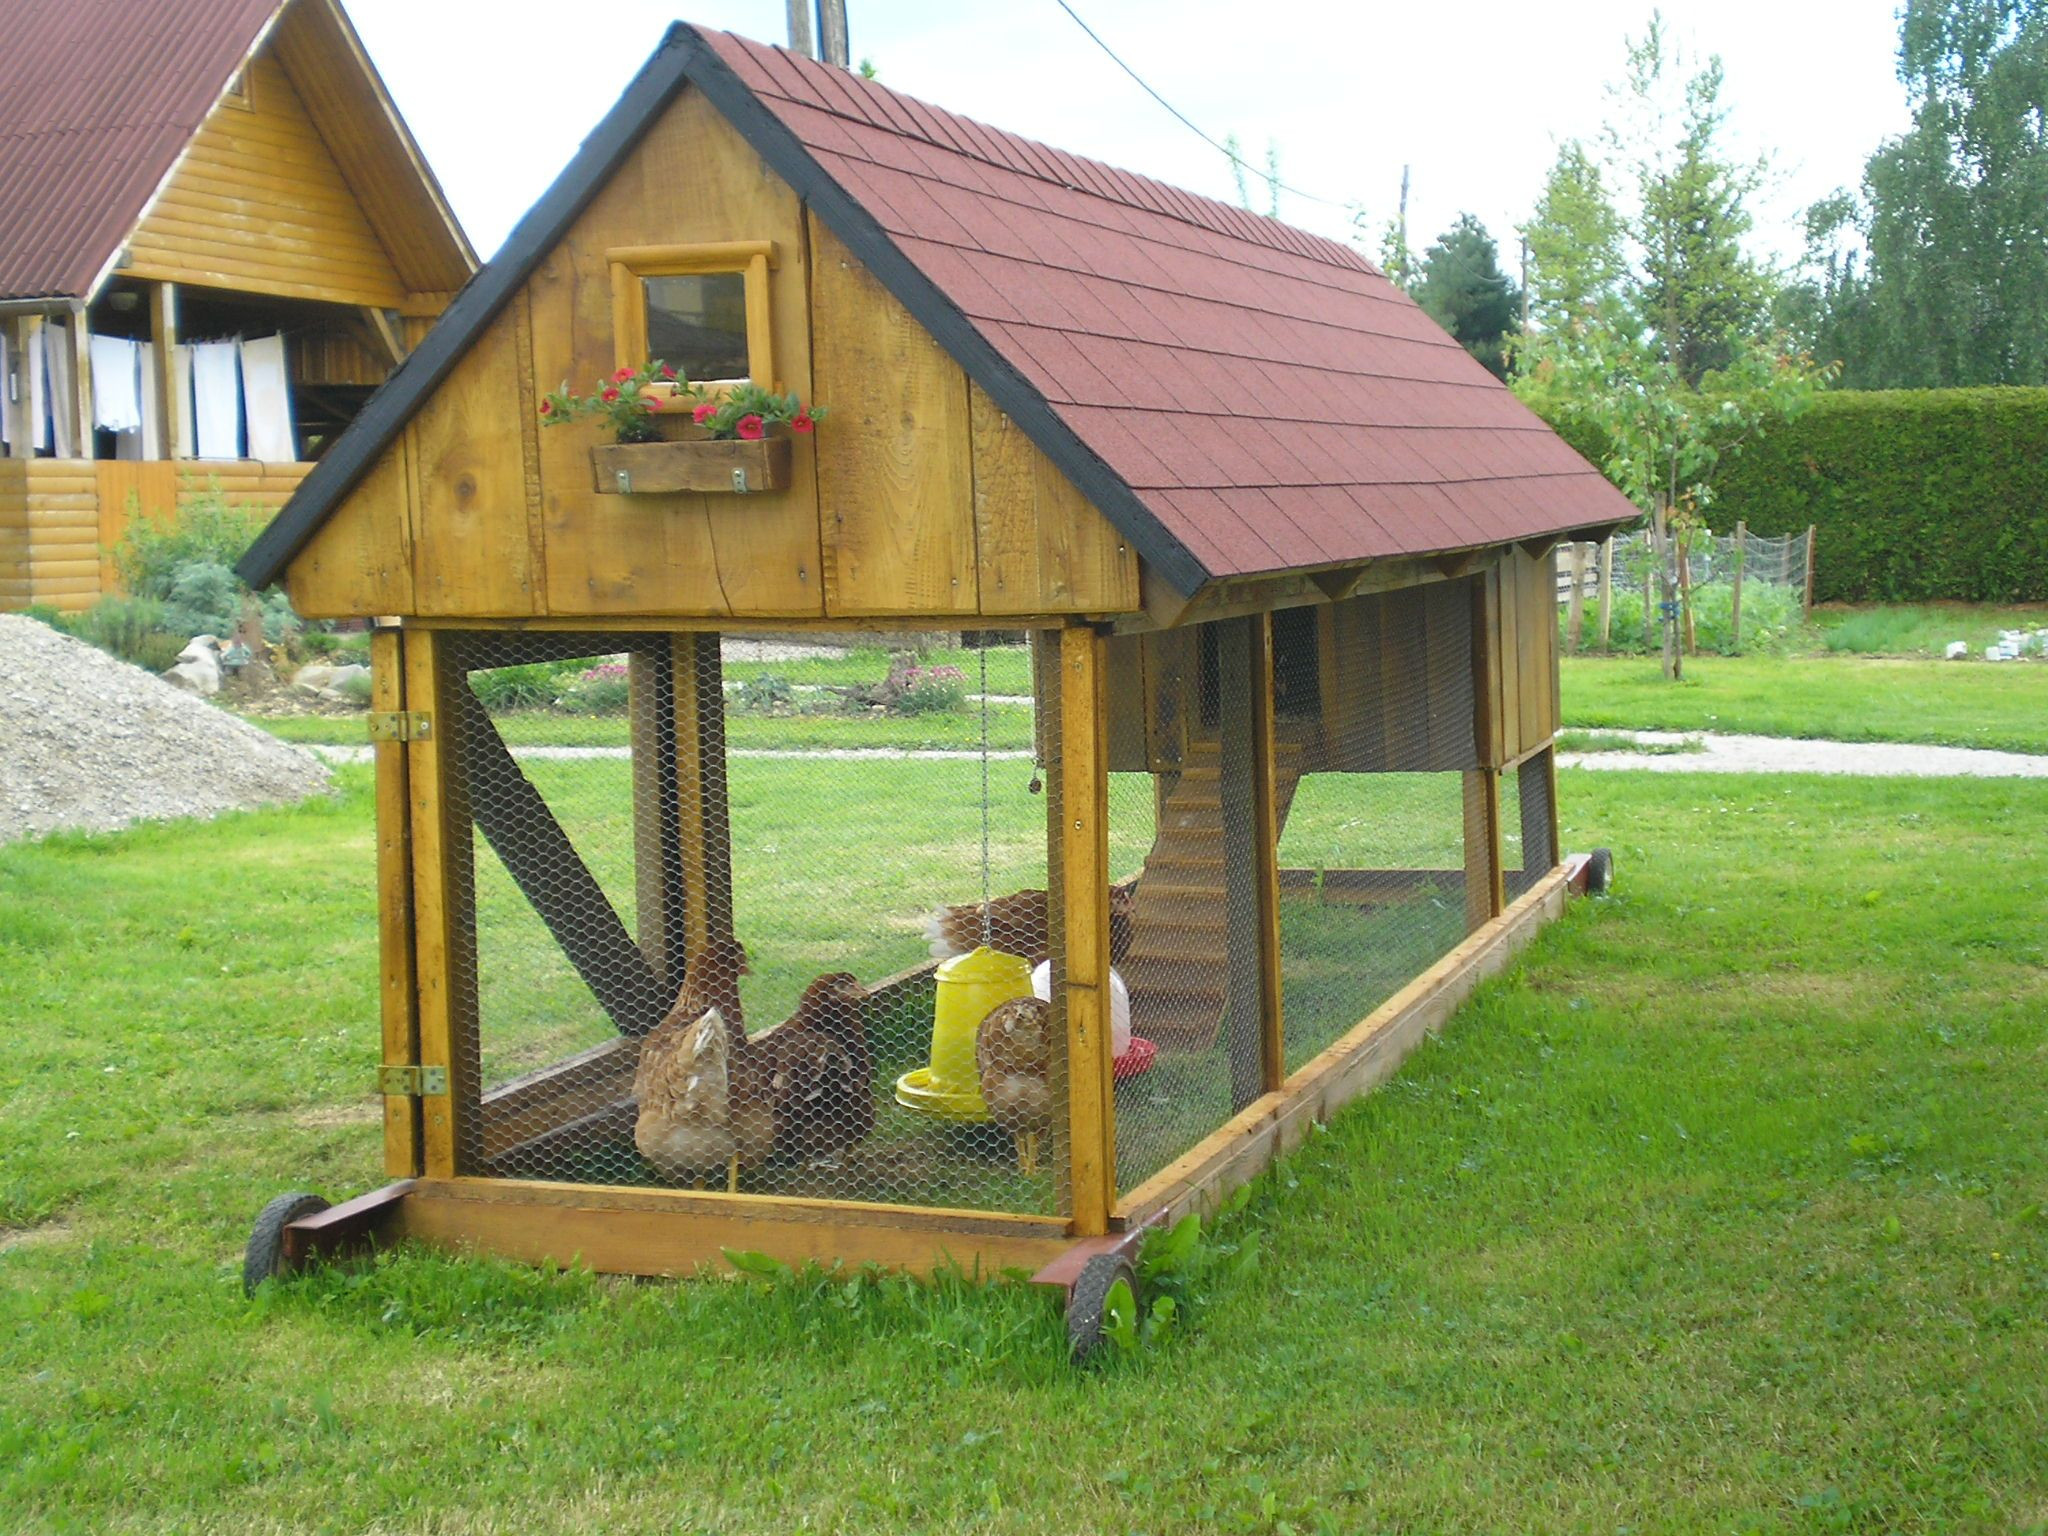 Backyard Chicken Coop Ideas
 Coco Chanel Castle Chickens and Chicken Coops